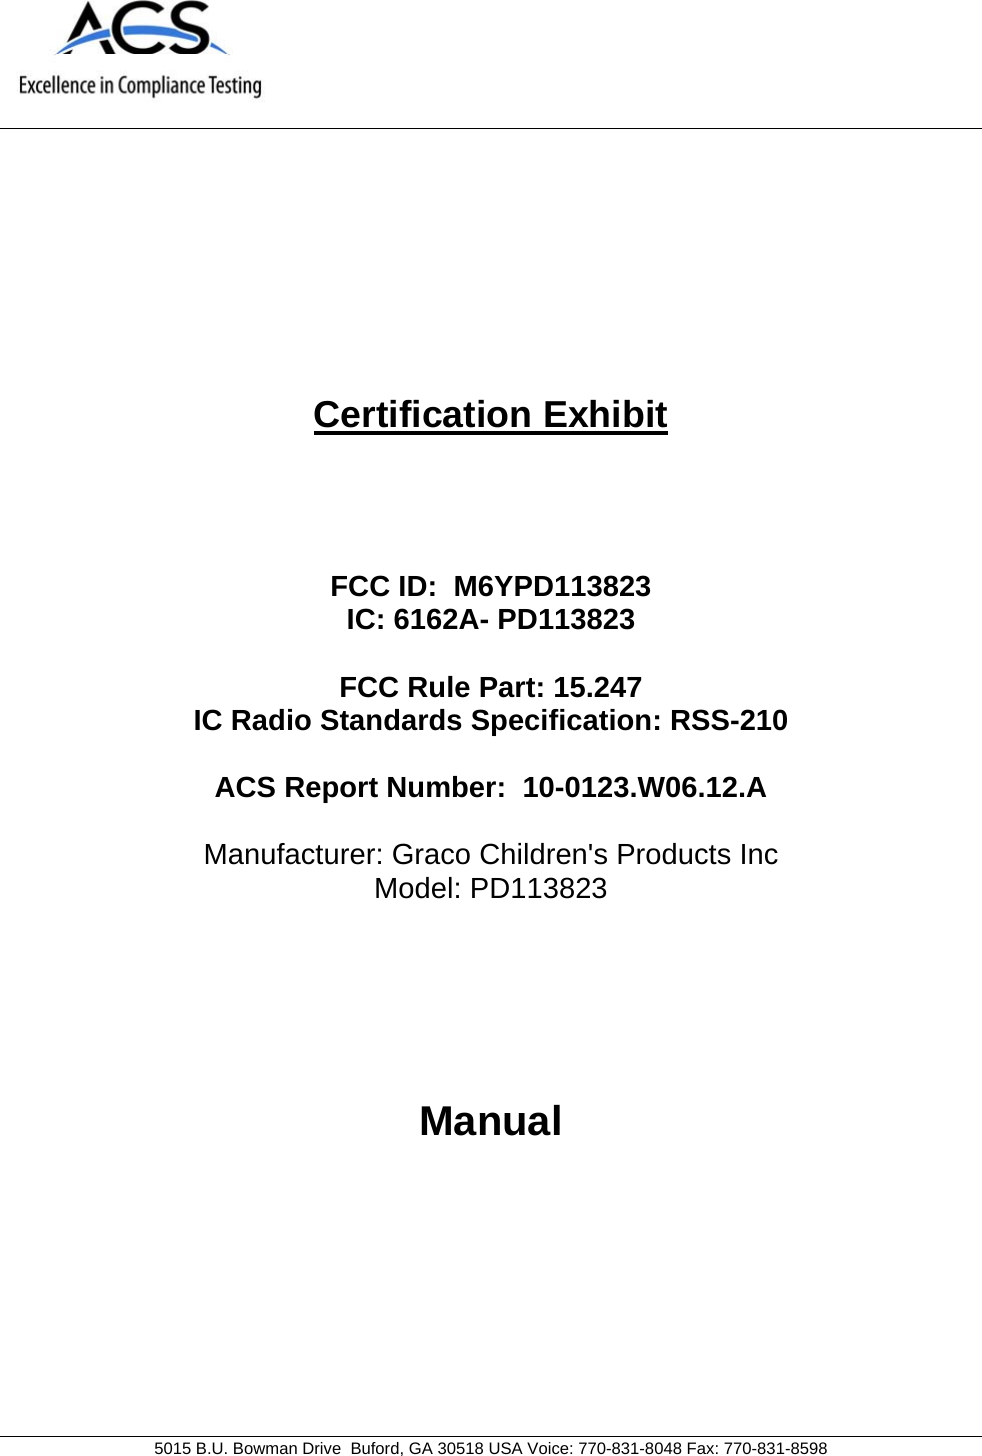     5015 B.U. Bowman Drive  Buford, GA 30518 USA Voice: 770-831-8048 Fax: 770-831-8598   Certification Exhibit     FCC ID:  M6YPD113823 IC: 6162A- PD113823  FCC Rule Part: 15.247 IC Radio Standards Specification: RSS-210  ACS Report Number:  10-0123.W06.12.A   Manufacturer: Graco Children&apos;s Products Inc Model: PD113823     Manual  